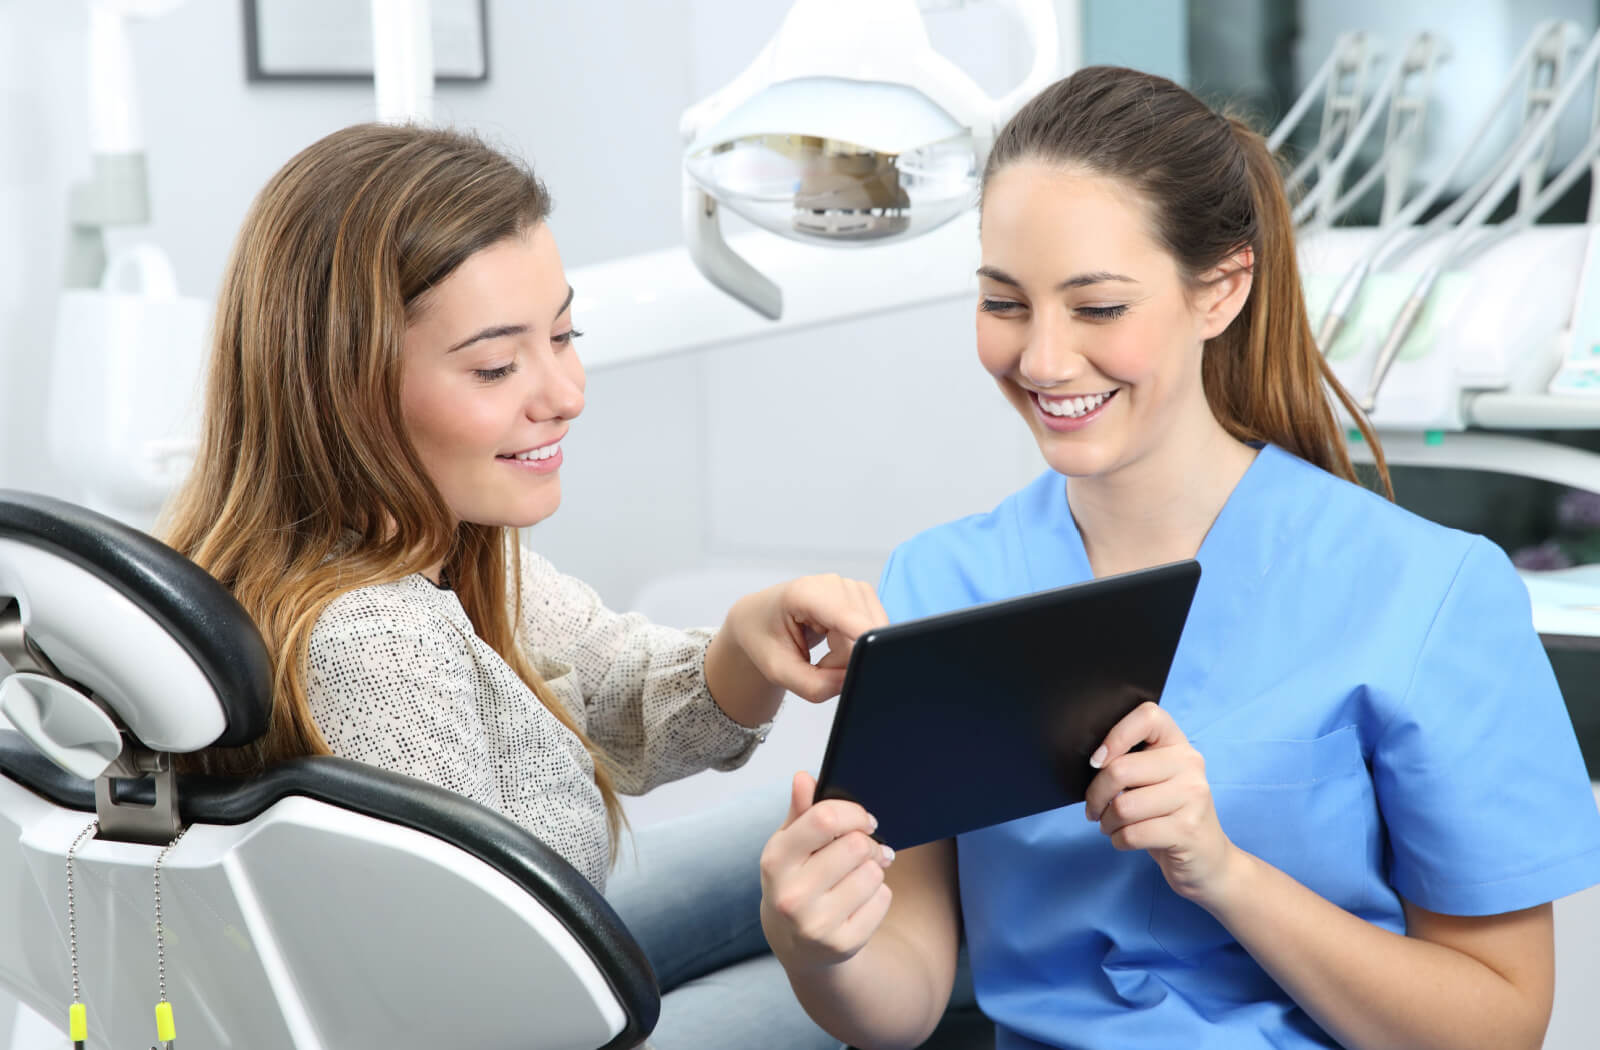 A female dentist in blue scrubs and a woman sitting in a dentist's chair looking at a tablet and smiling.
